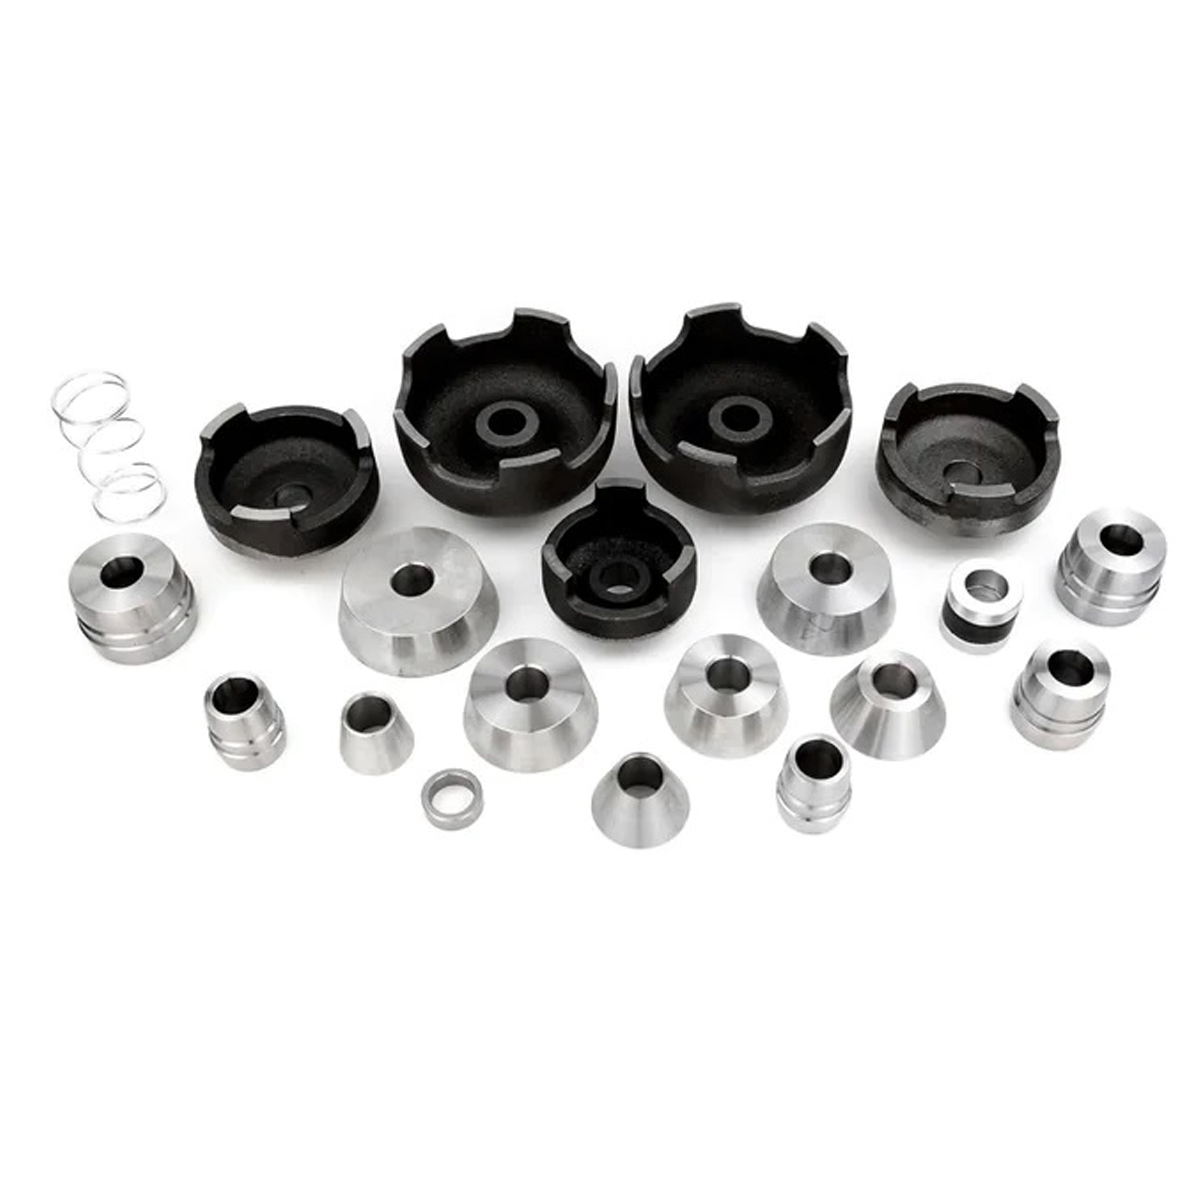 Adapter Sets / Centering Cones / Spacers